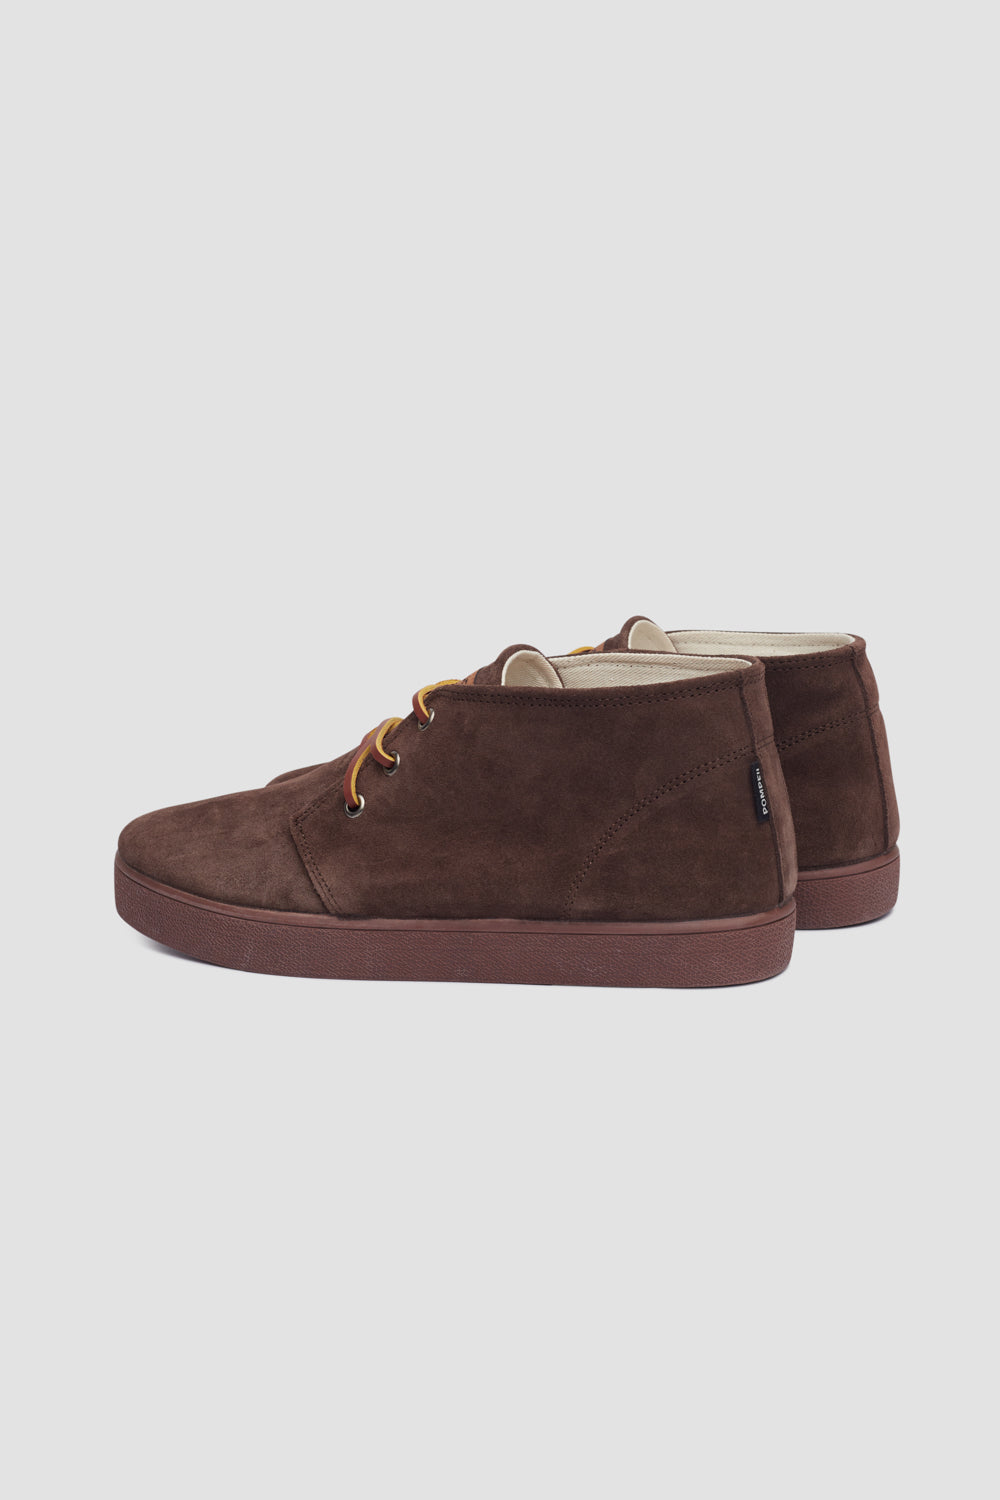 CATALINA SUEDE HYDRO BROWN MINK